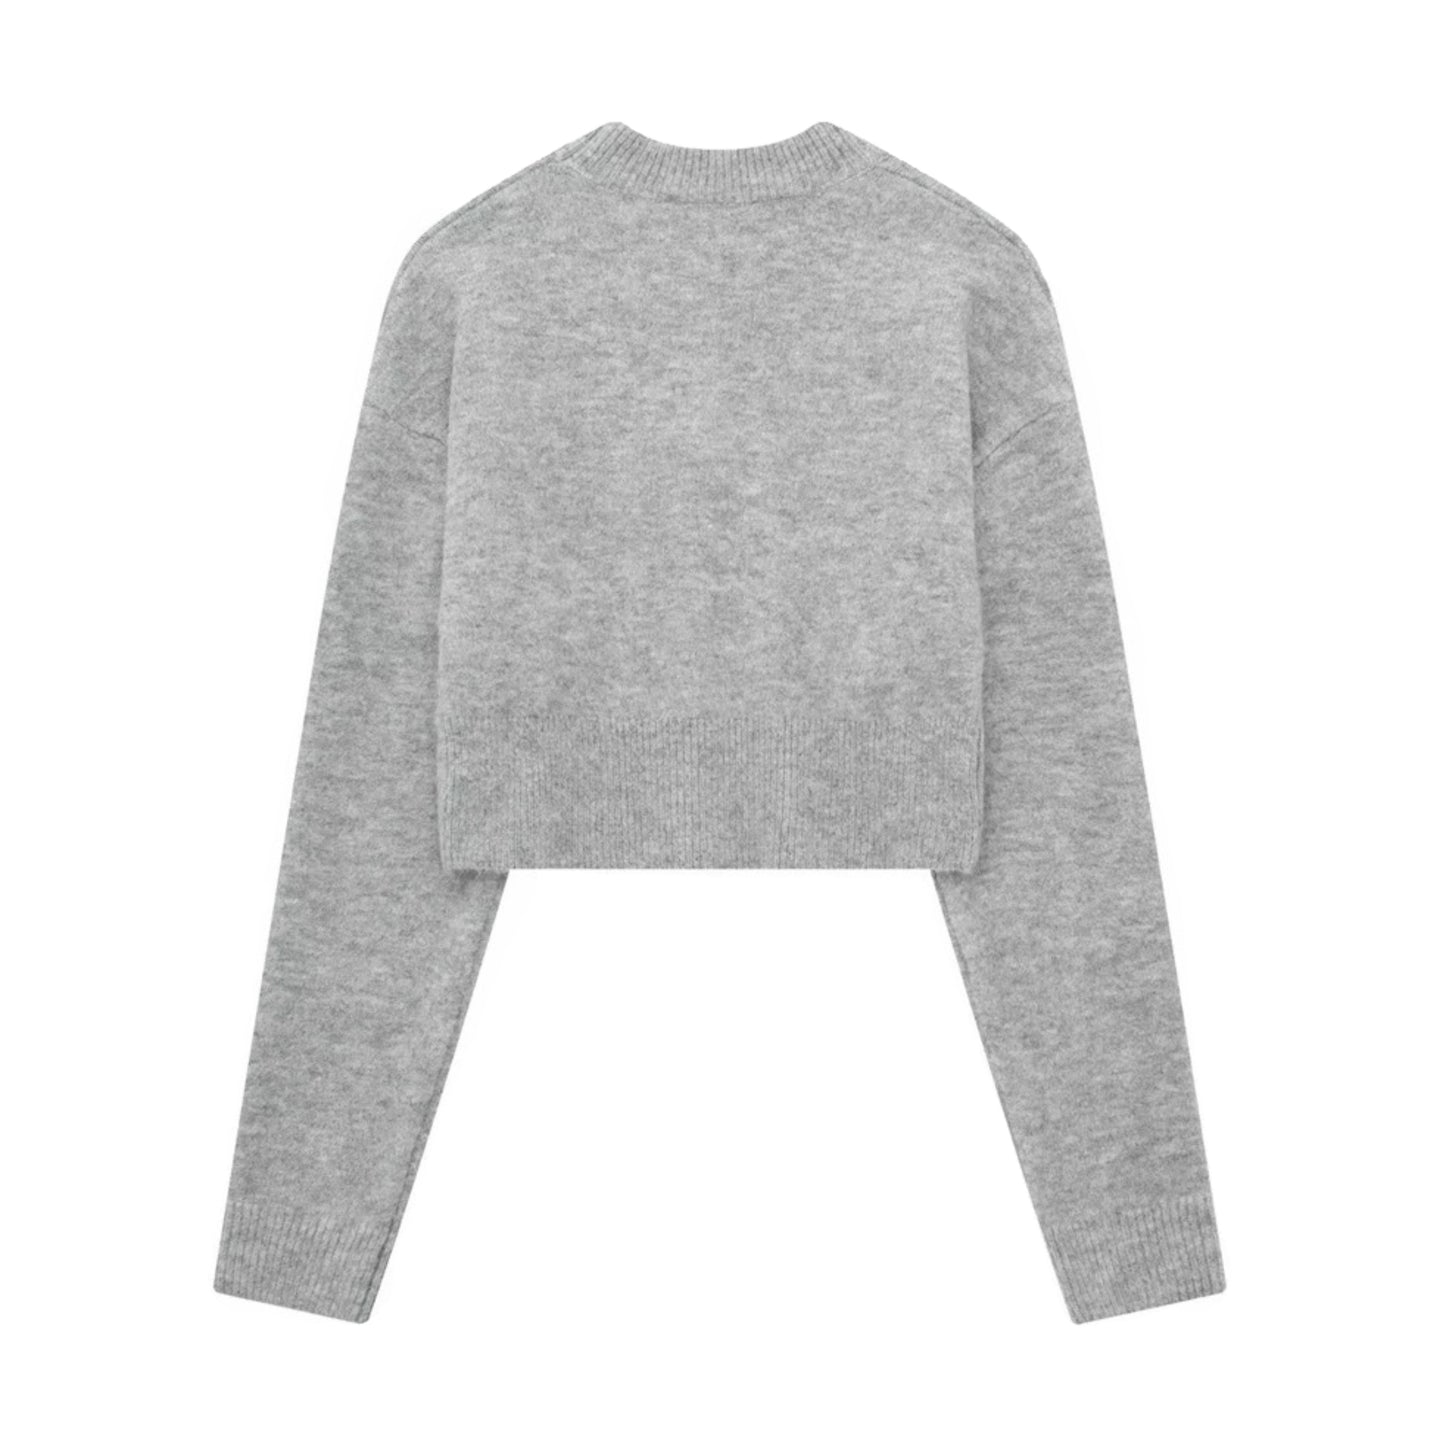 Light Gray Knit Pullover Cropped Sweater